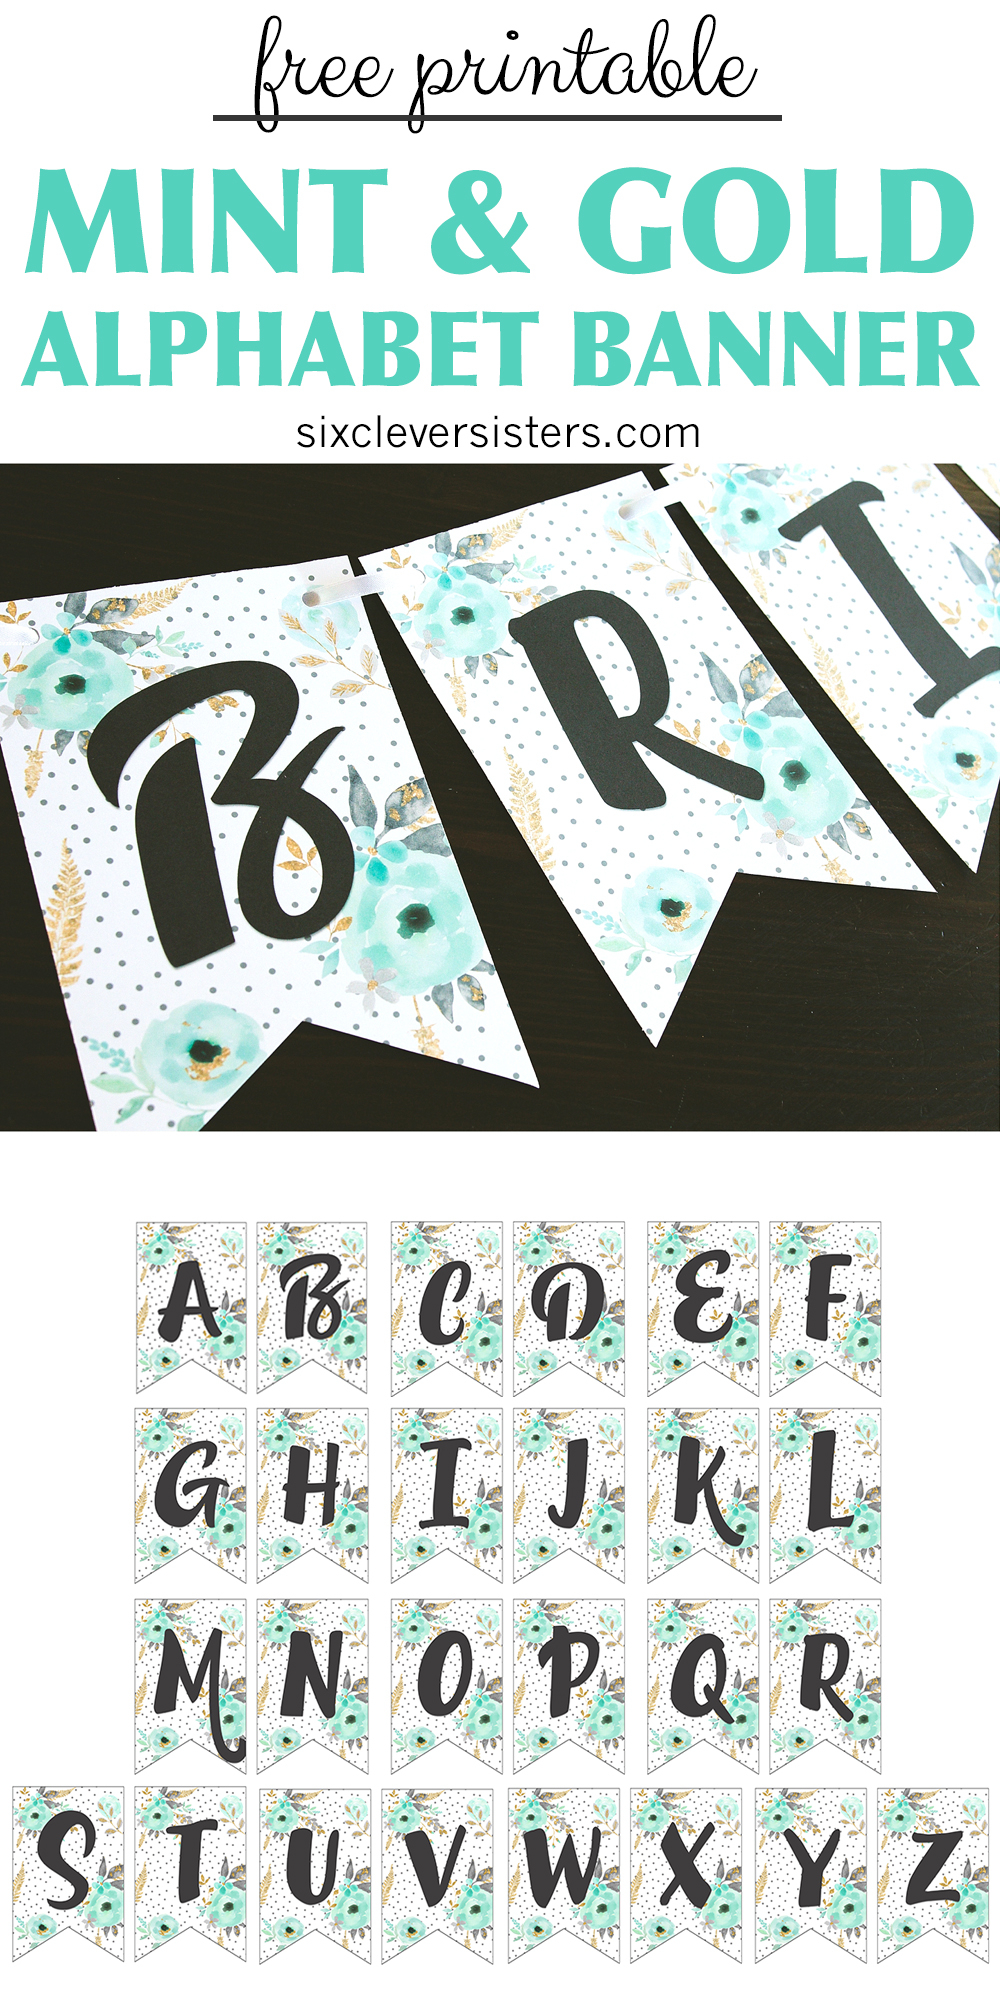 Free Printable Alphabet Banner MINT& GOLD - Six Clever Sisters For Printable Letter Templates For Banners